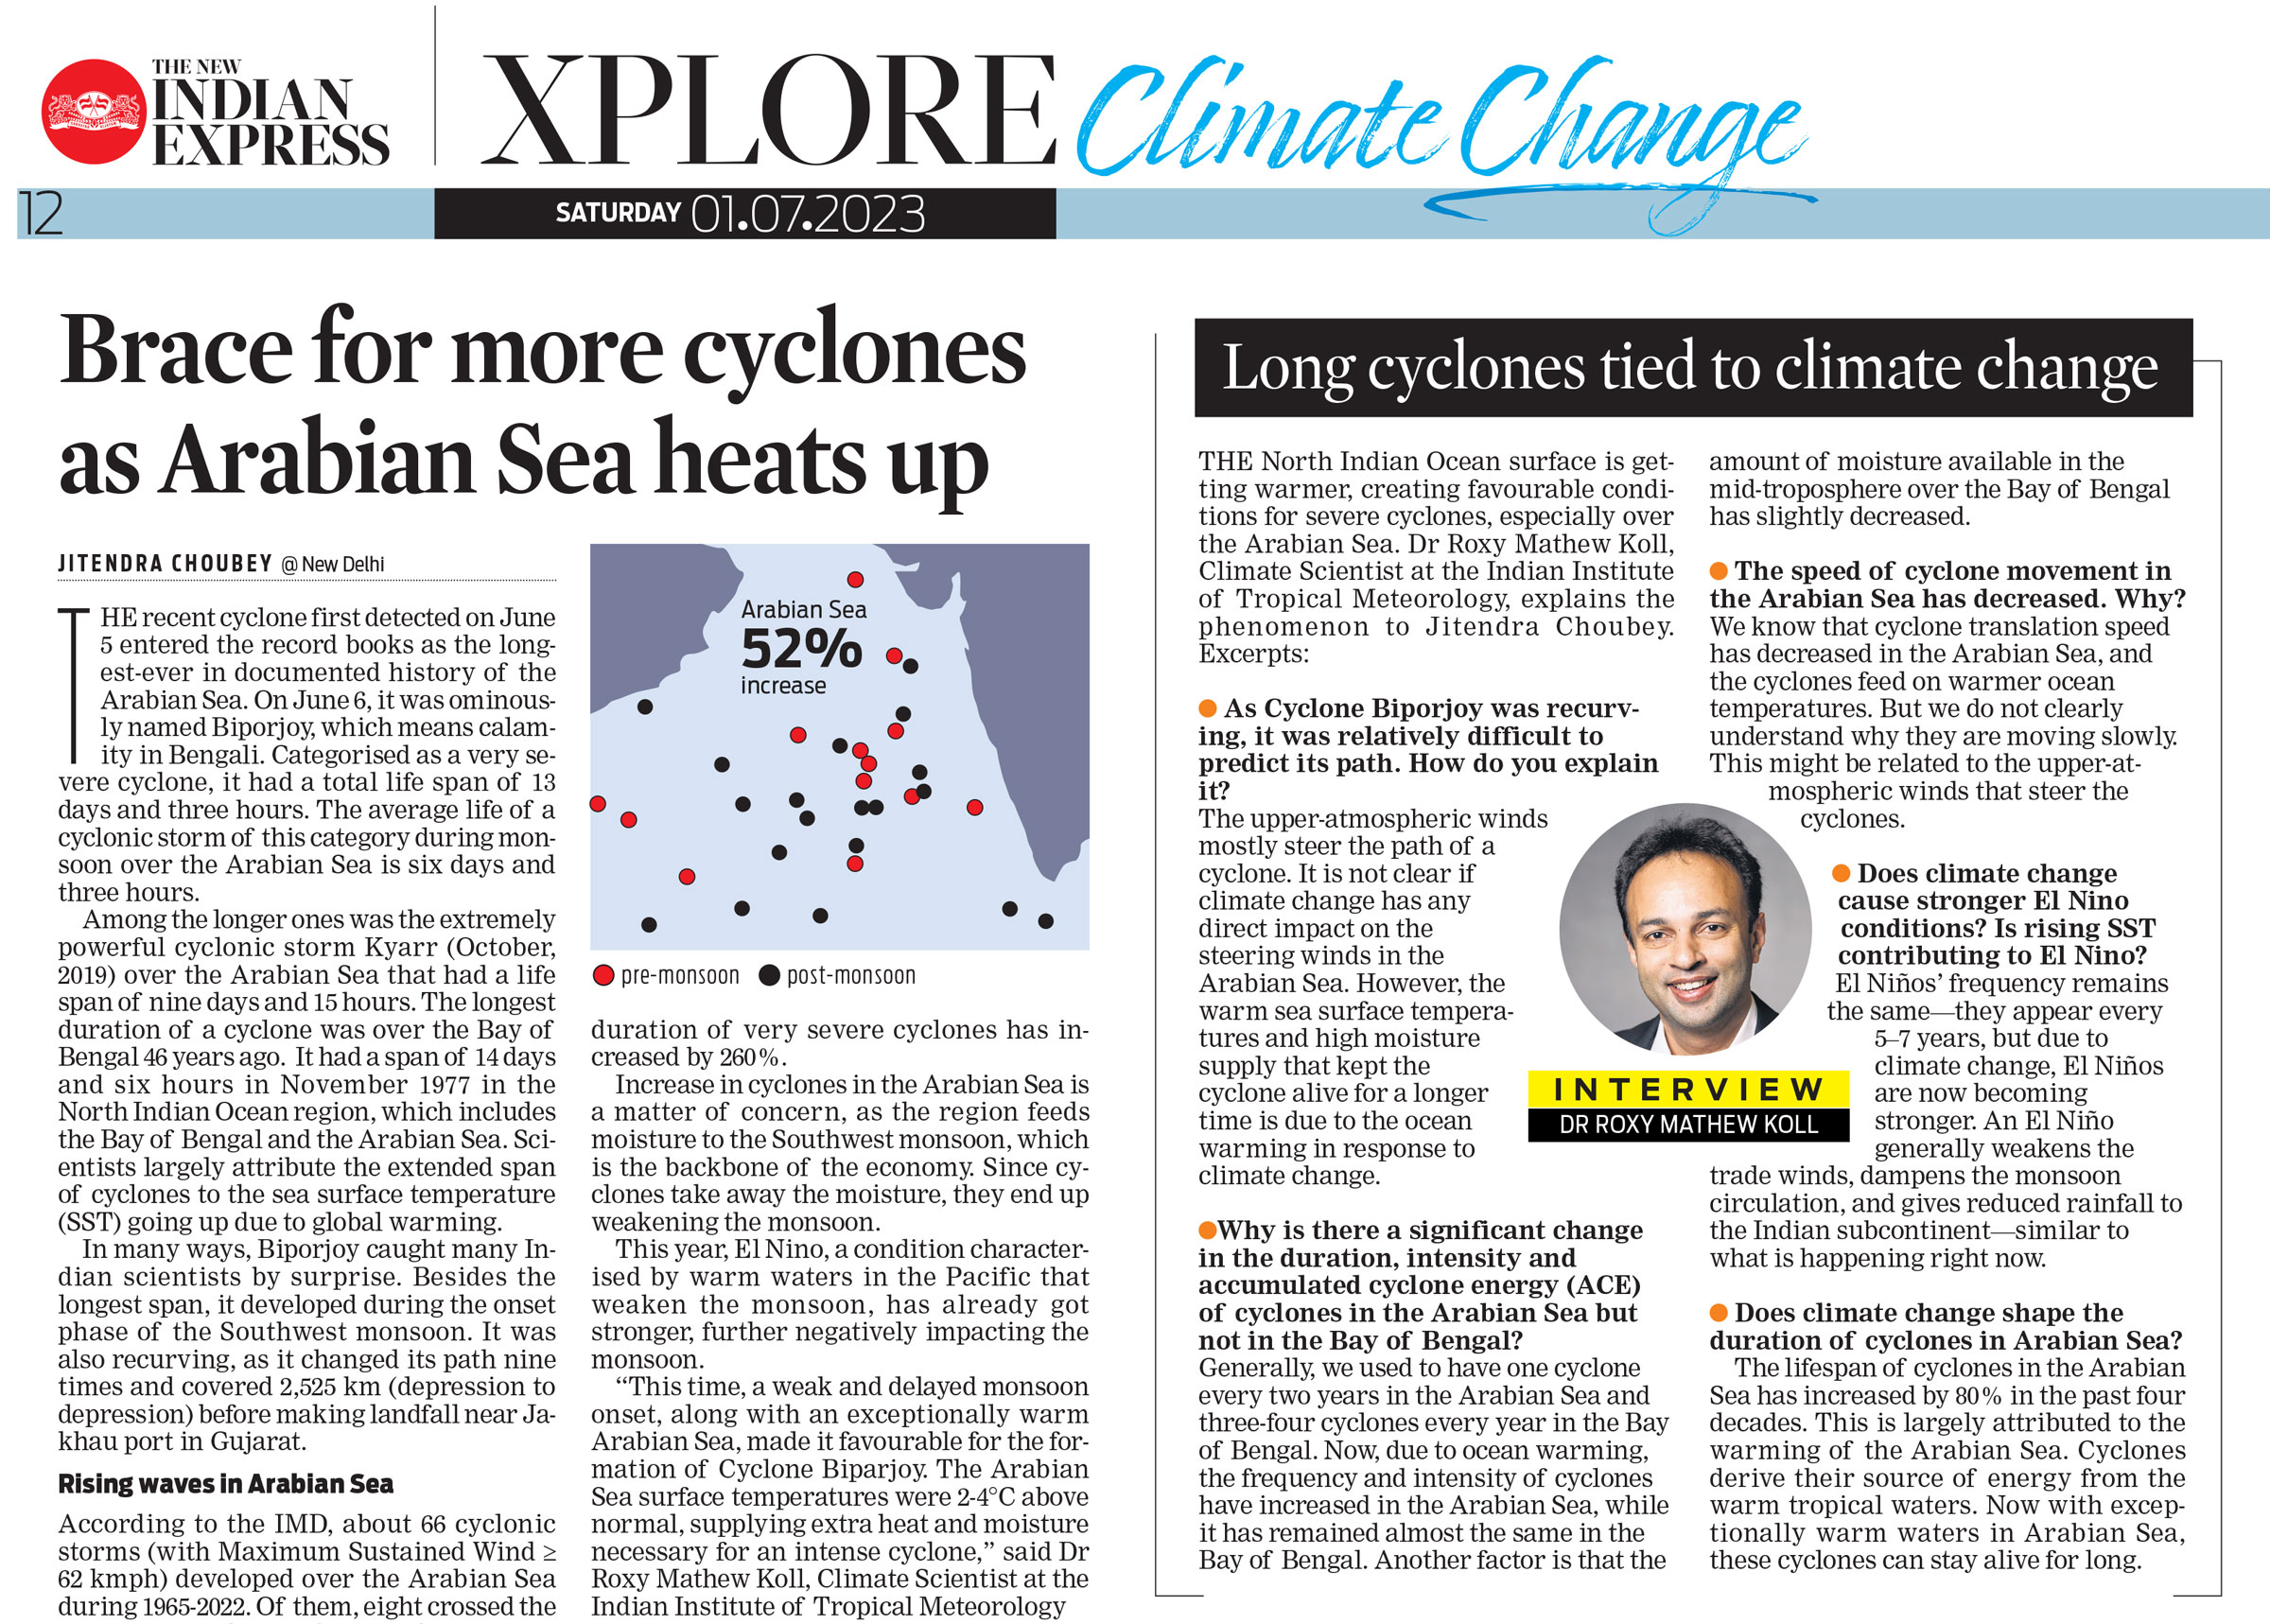 The New Indian Express Interview with Roxy Mathew Koll on Arabian Sea Cyclones and Climate Change